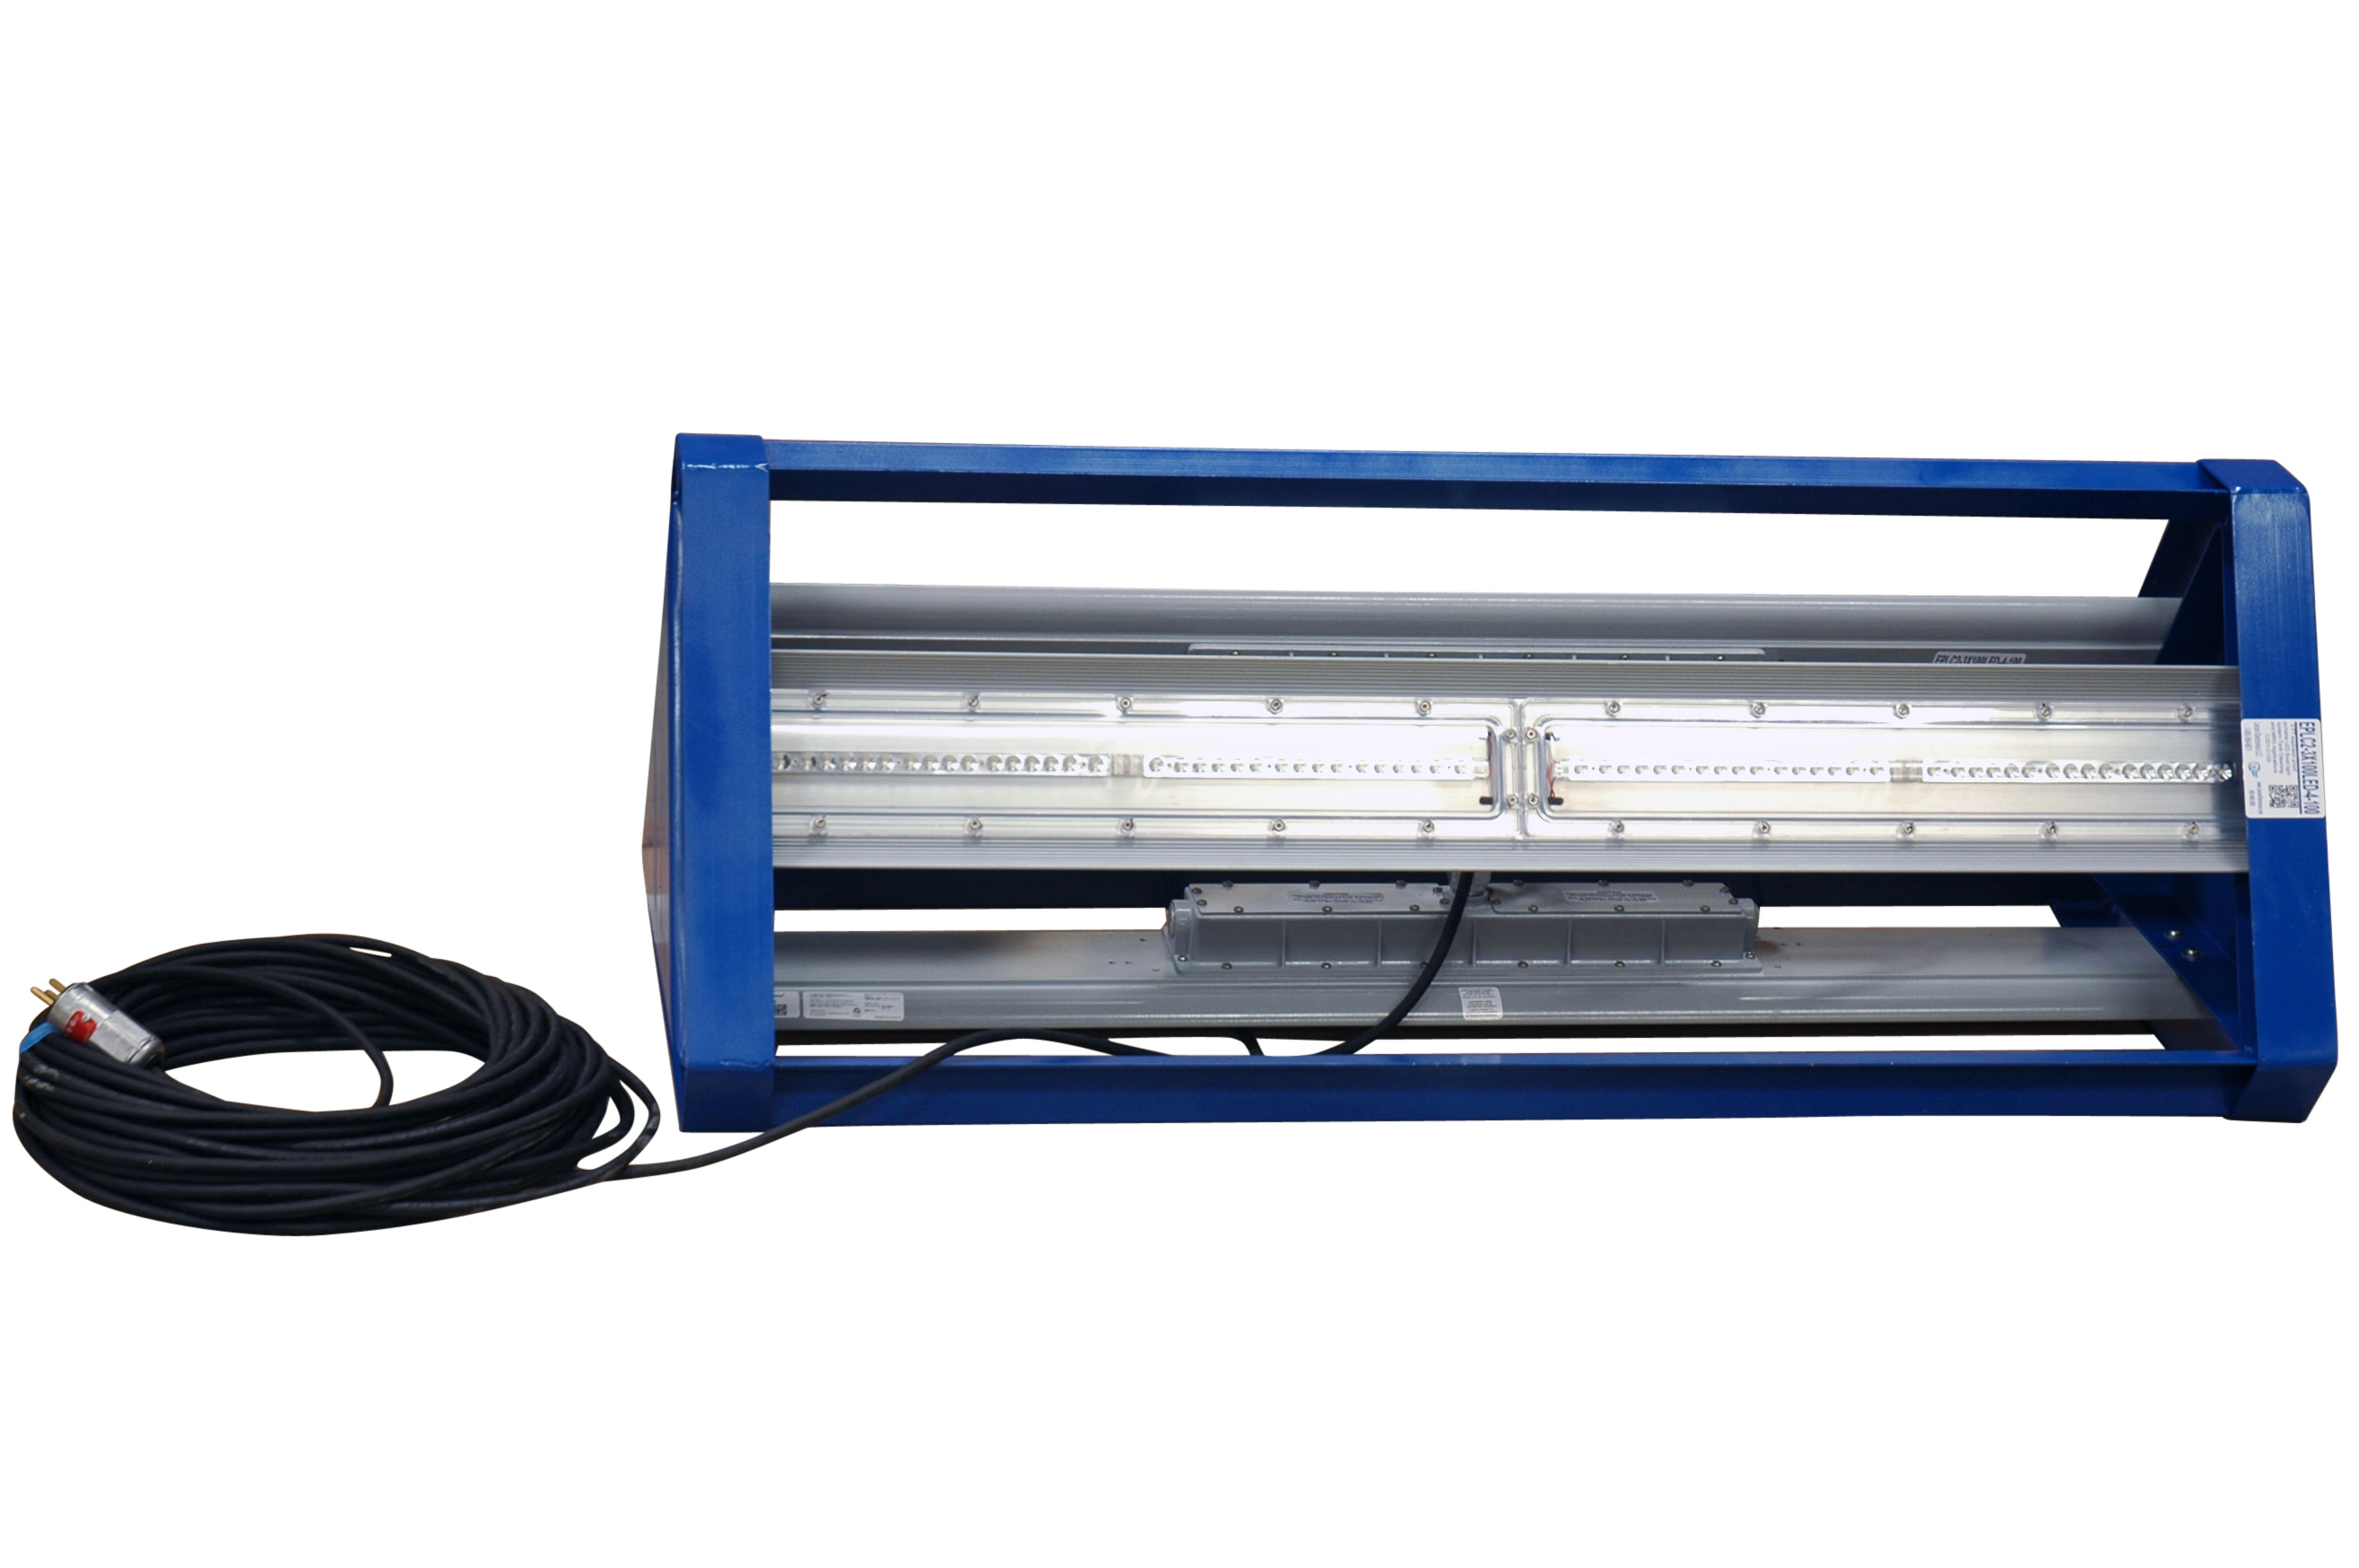 Versatile LED Flood Lighting System Equipped with a Pick-Eye and Locking Caster Wheels